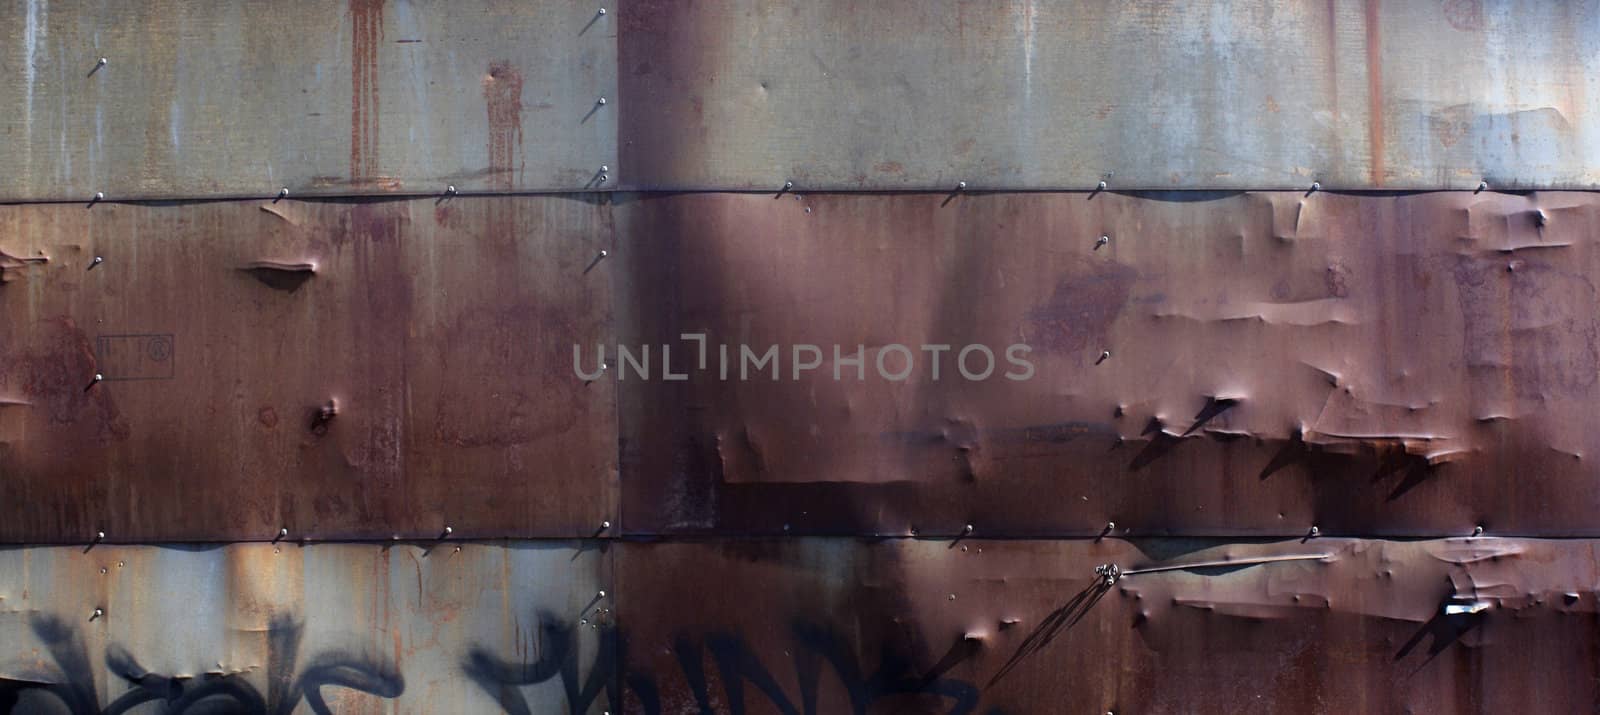 Metal grunge background or transparacy. High quality and great for any urban schene.
